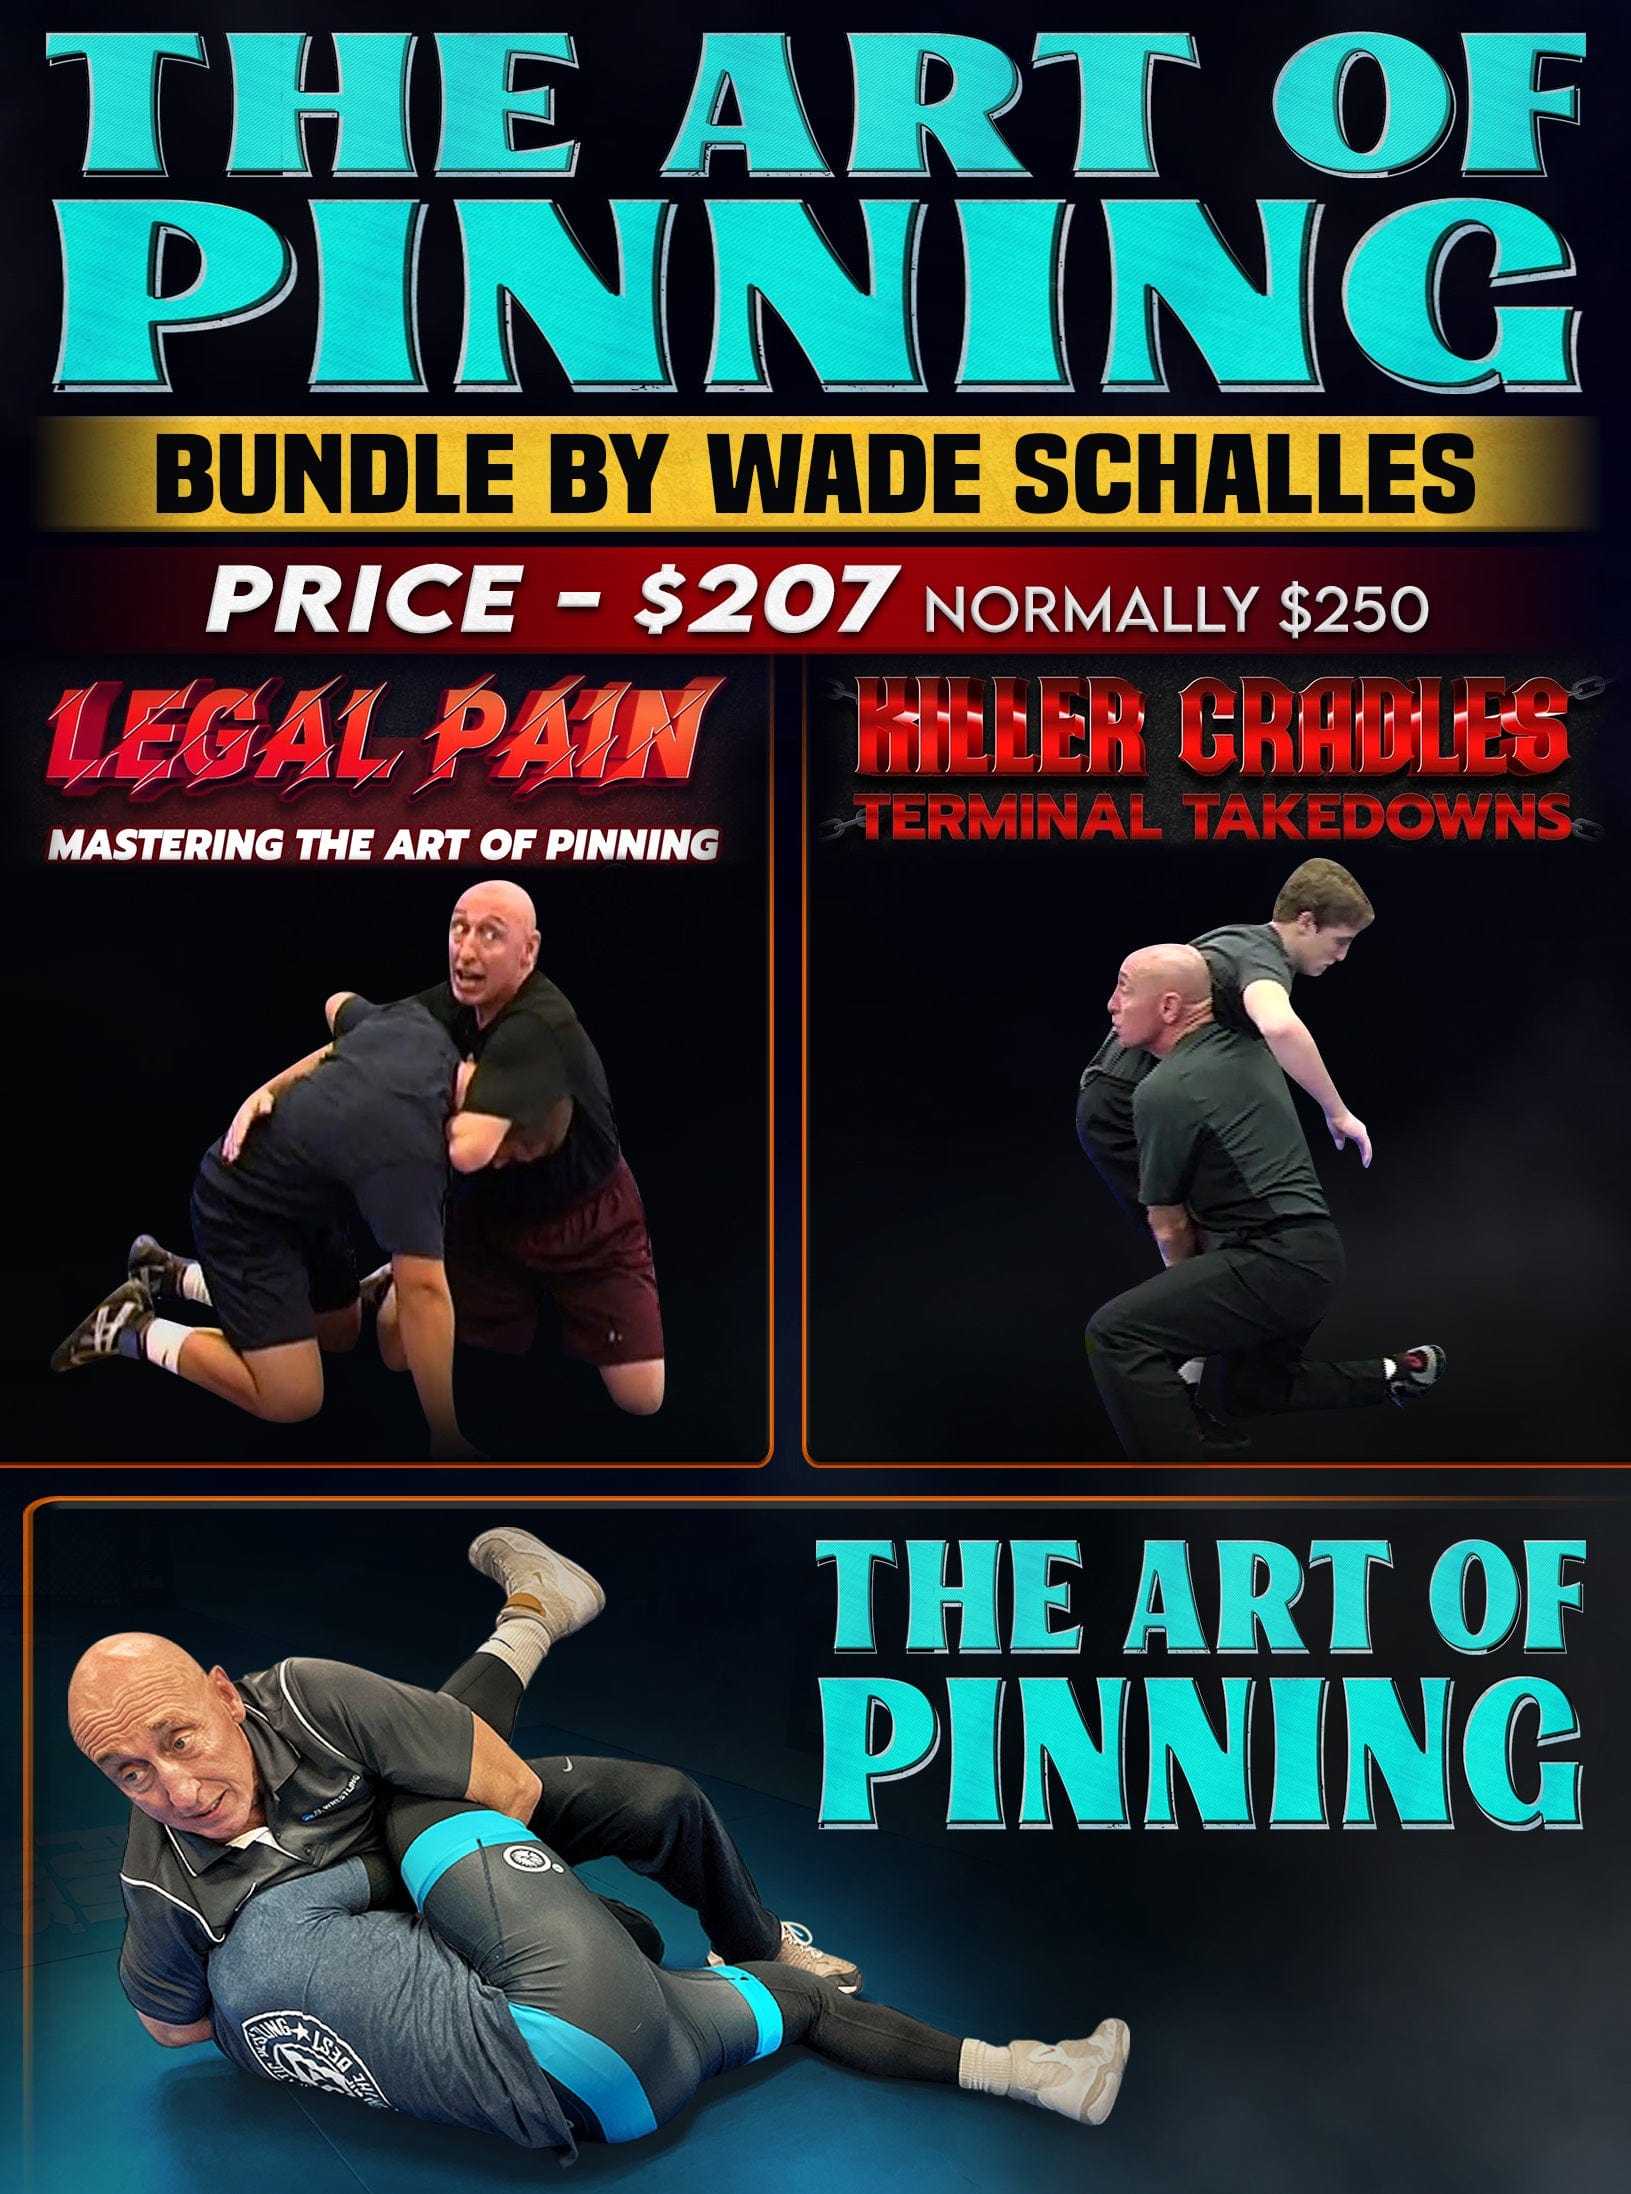 The Art of Pinning Bundle by Wade Schalles - Fanatic Wrestling